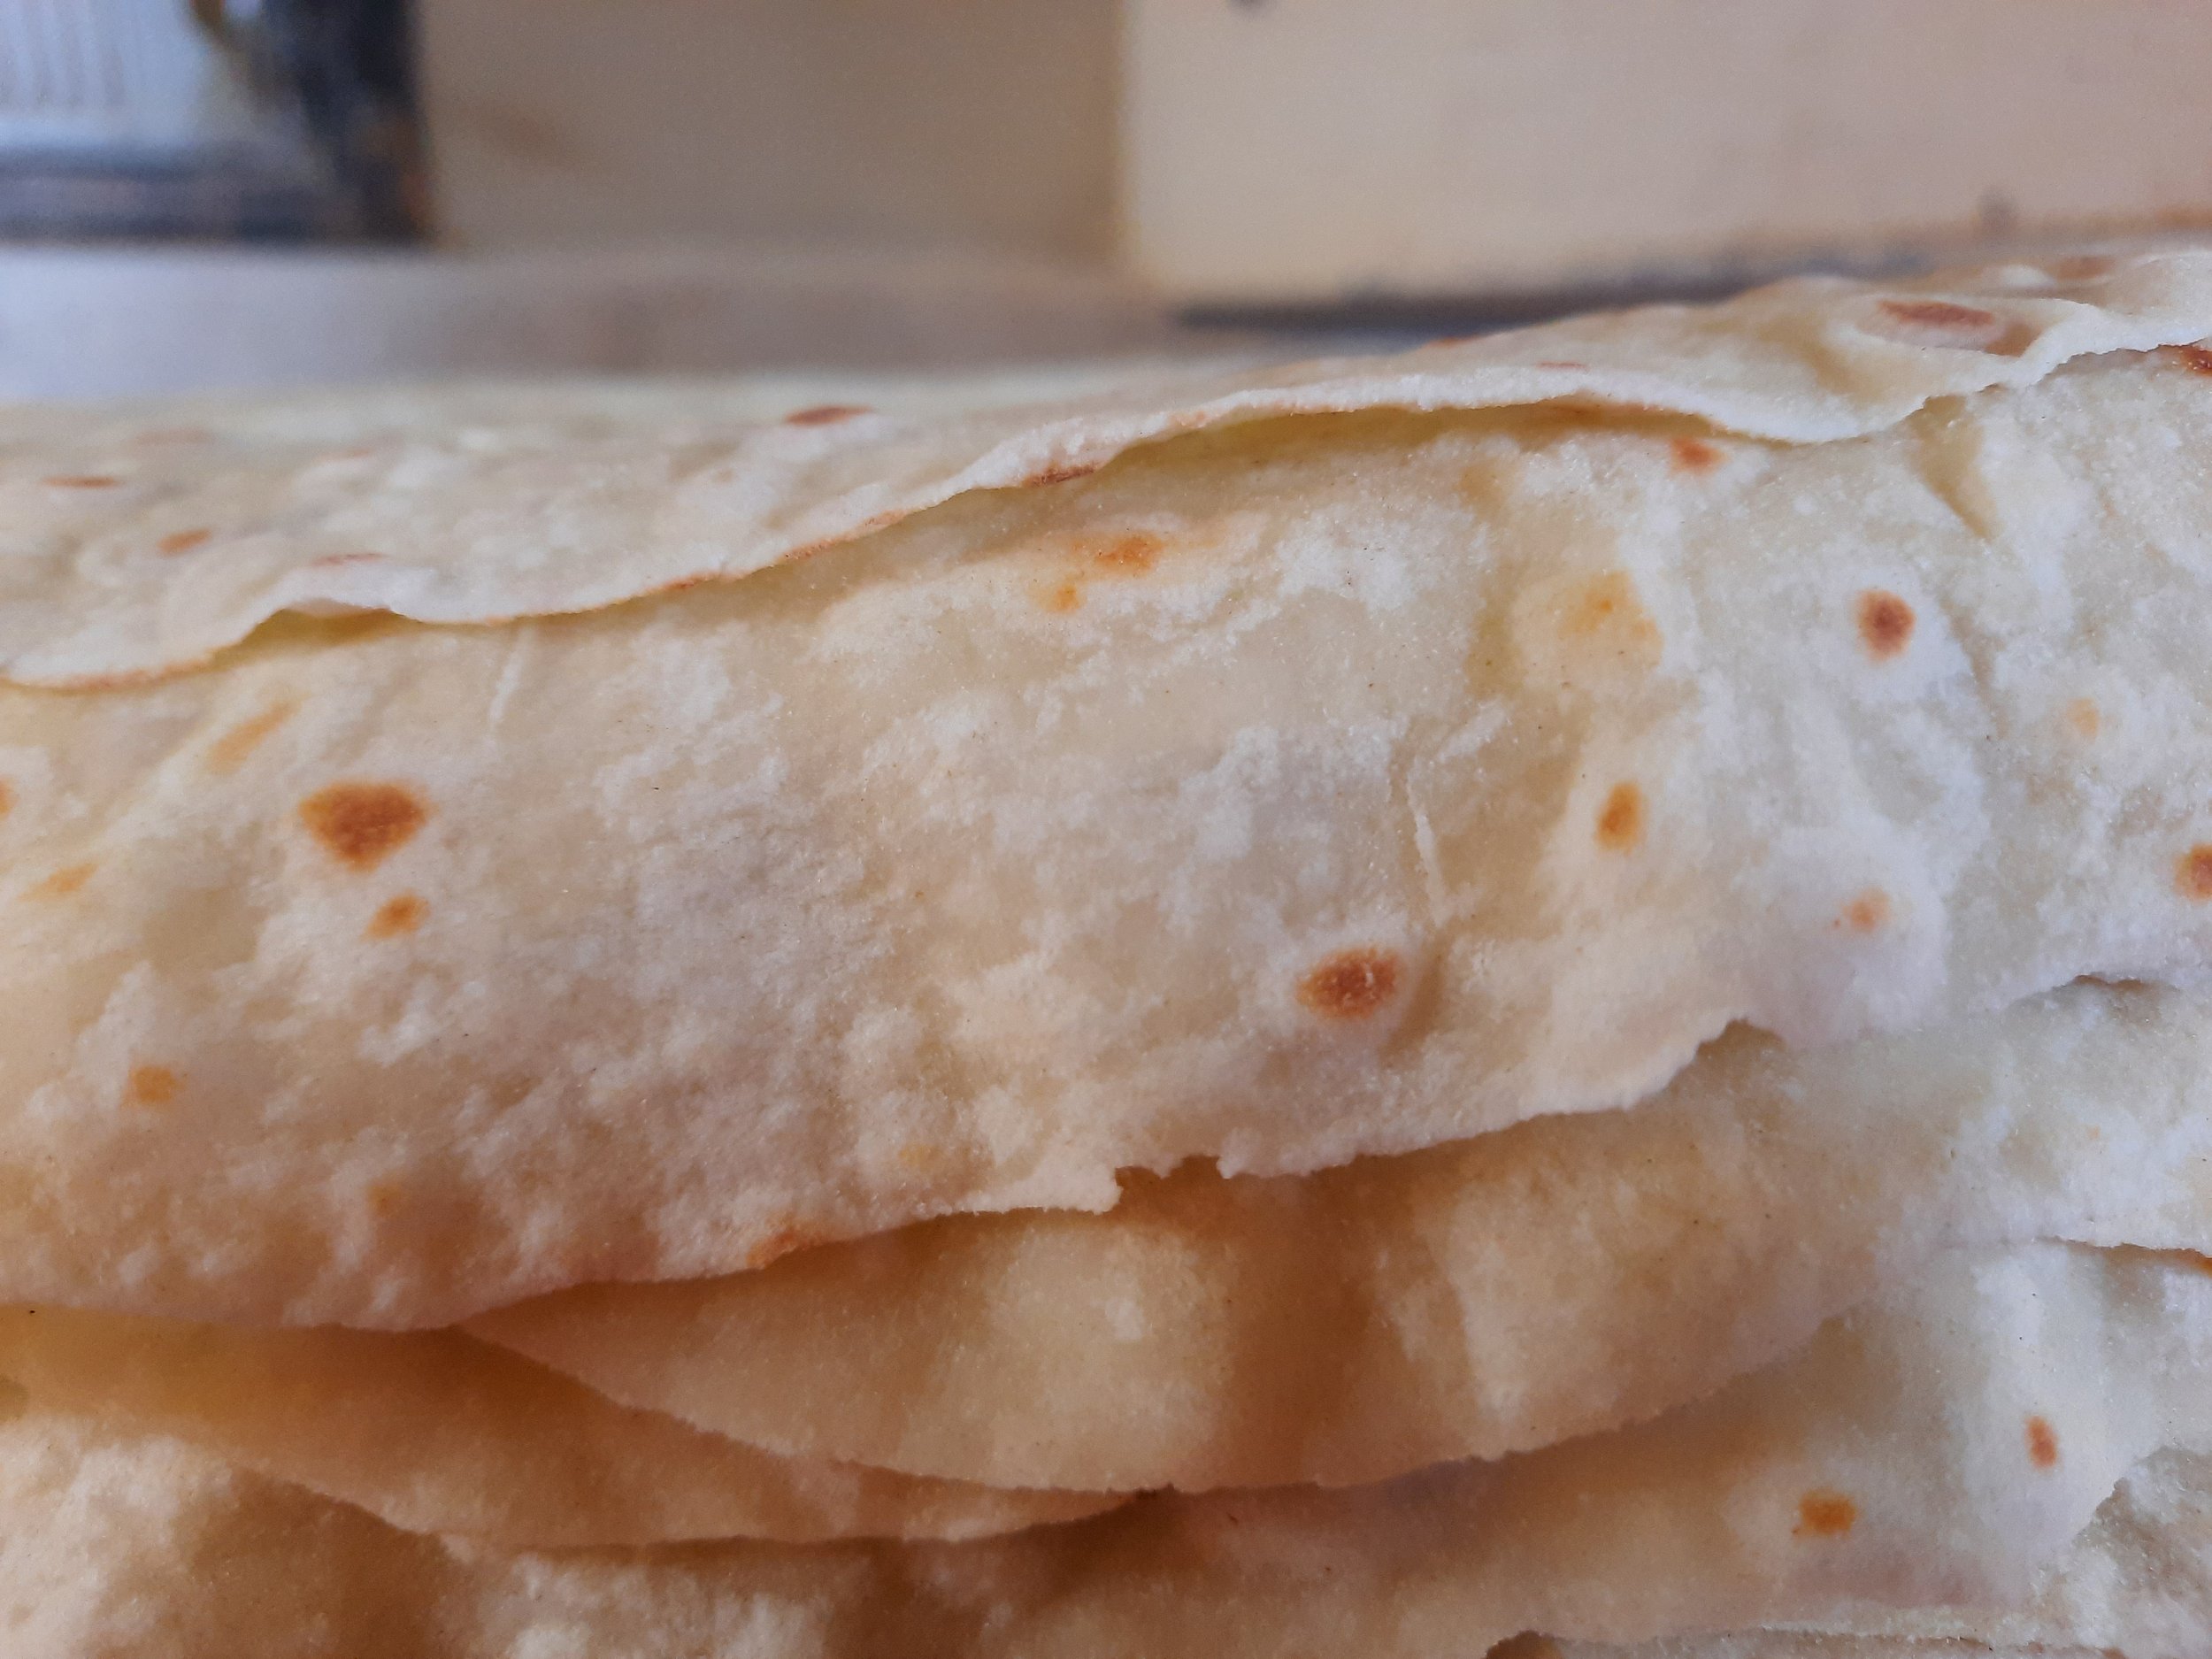 It's a stack of lefse!